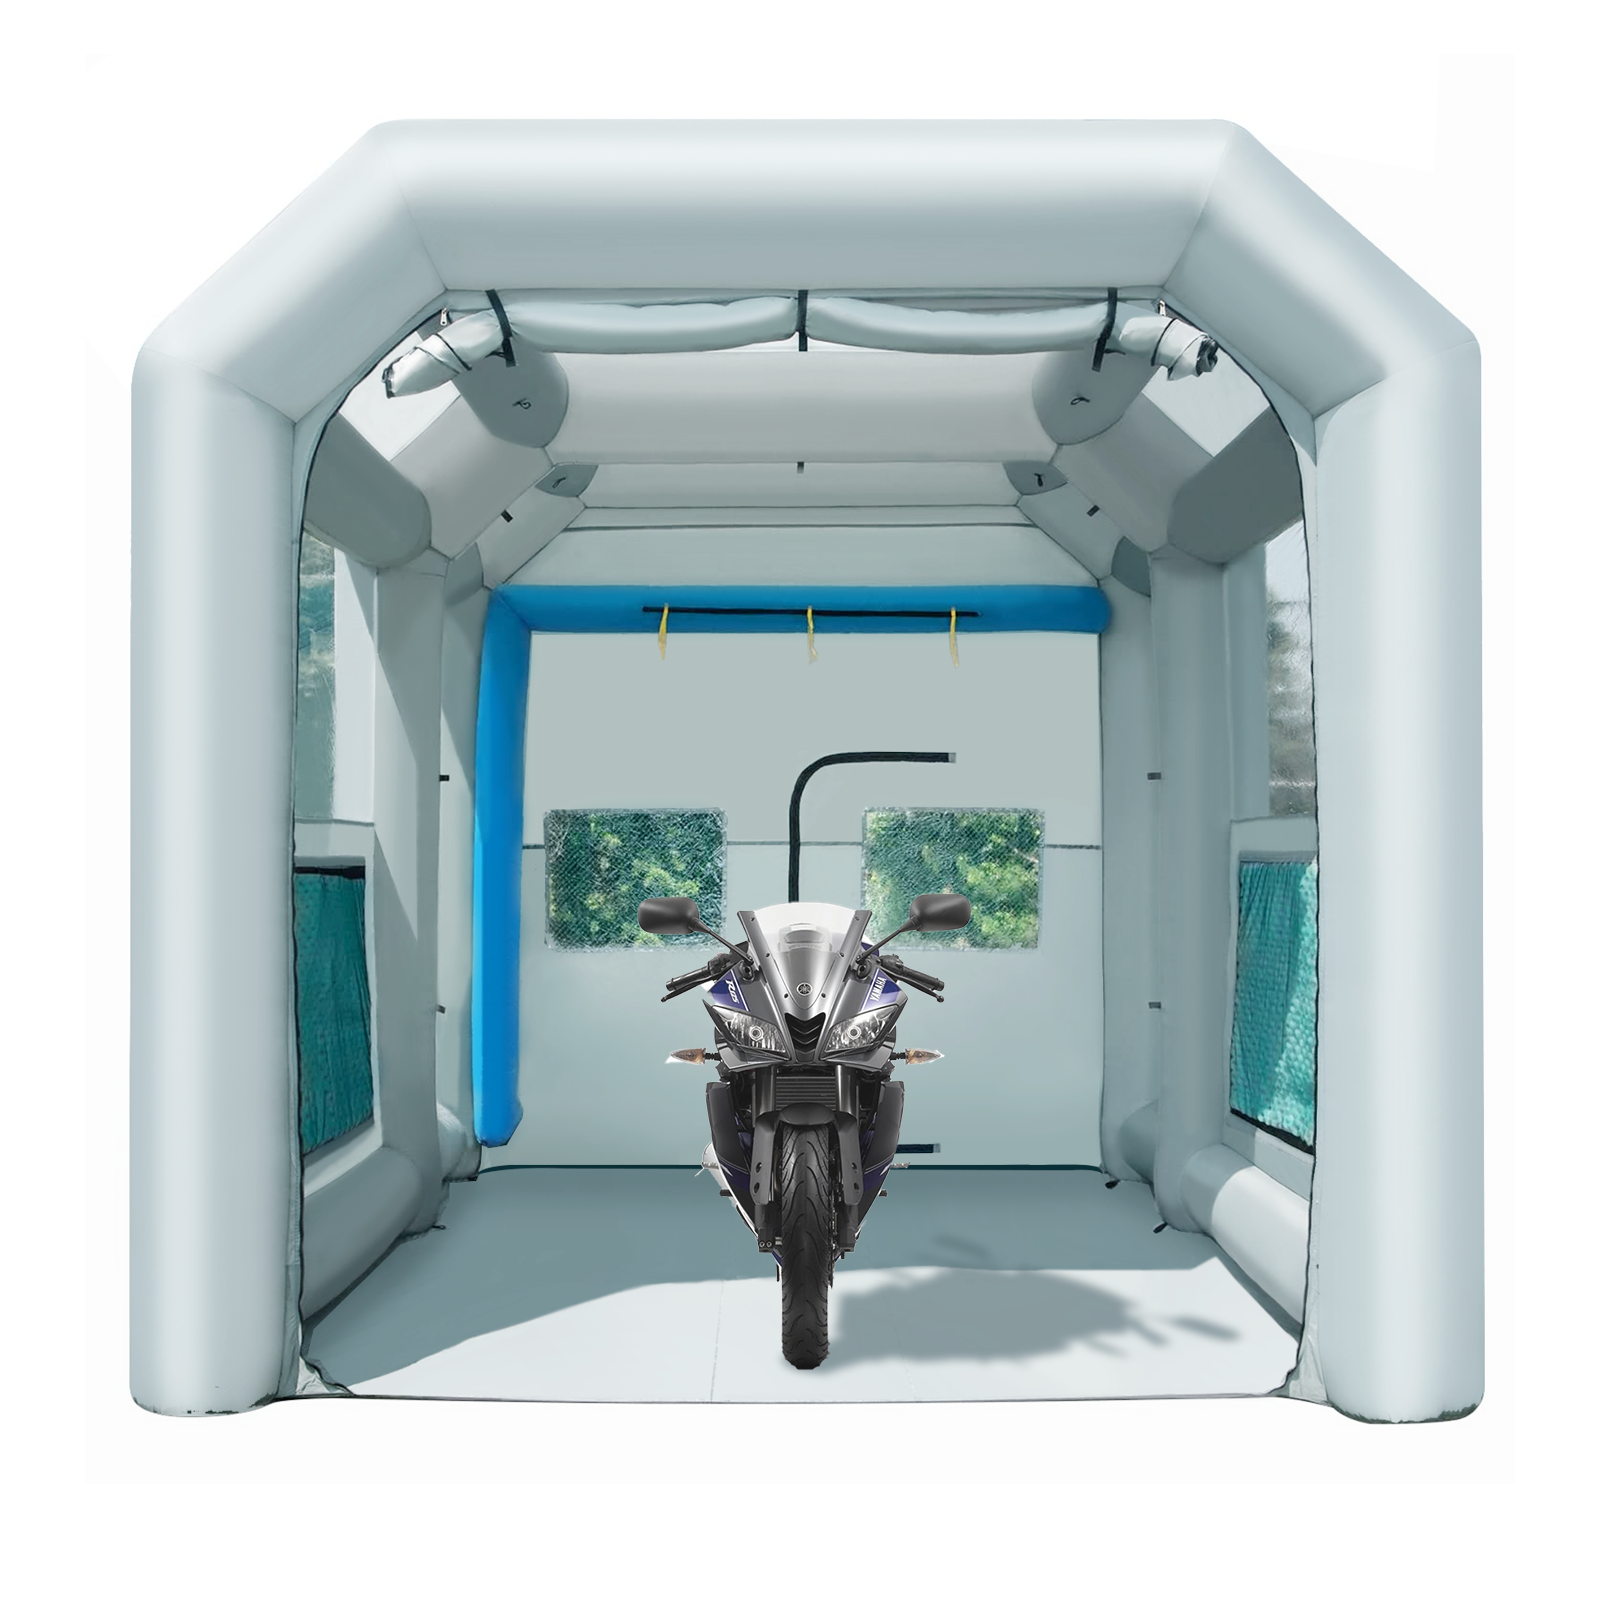 Sewinfla Professional Inflatable Paint Booth 26x15x10ft Environmentally-friendly Air Filter System Portable Paint Booth with Powerful Blowers